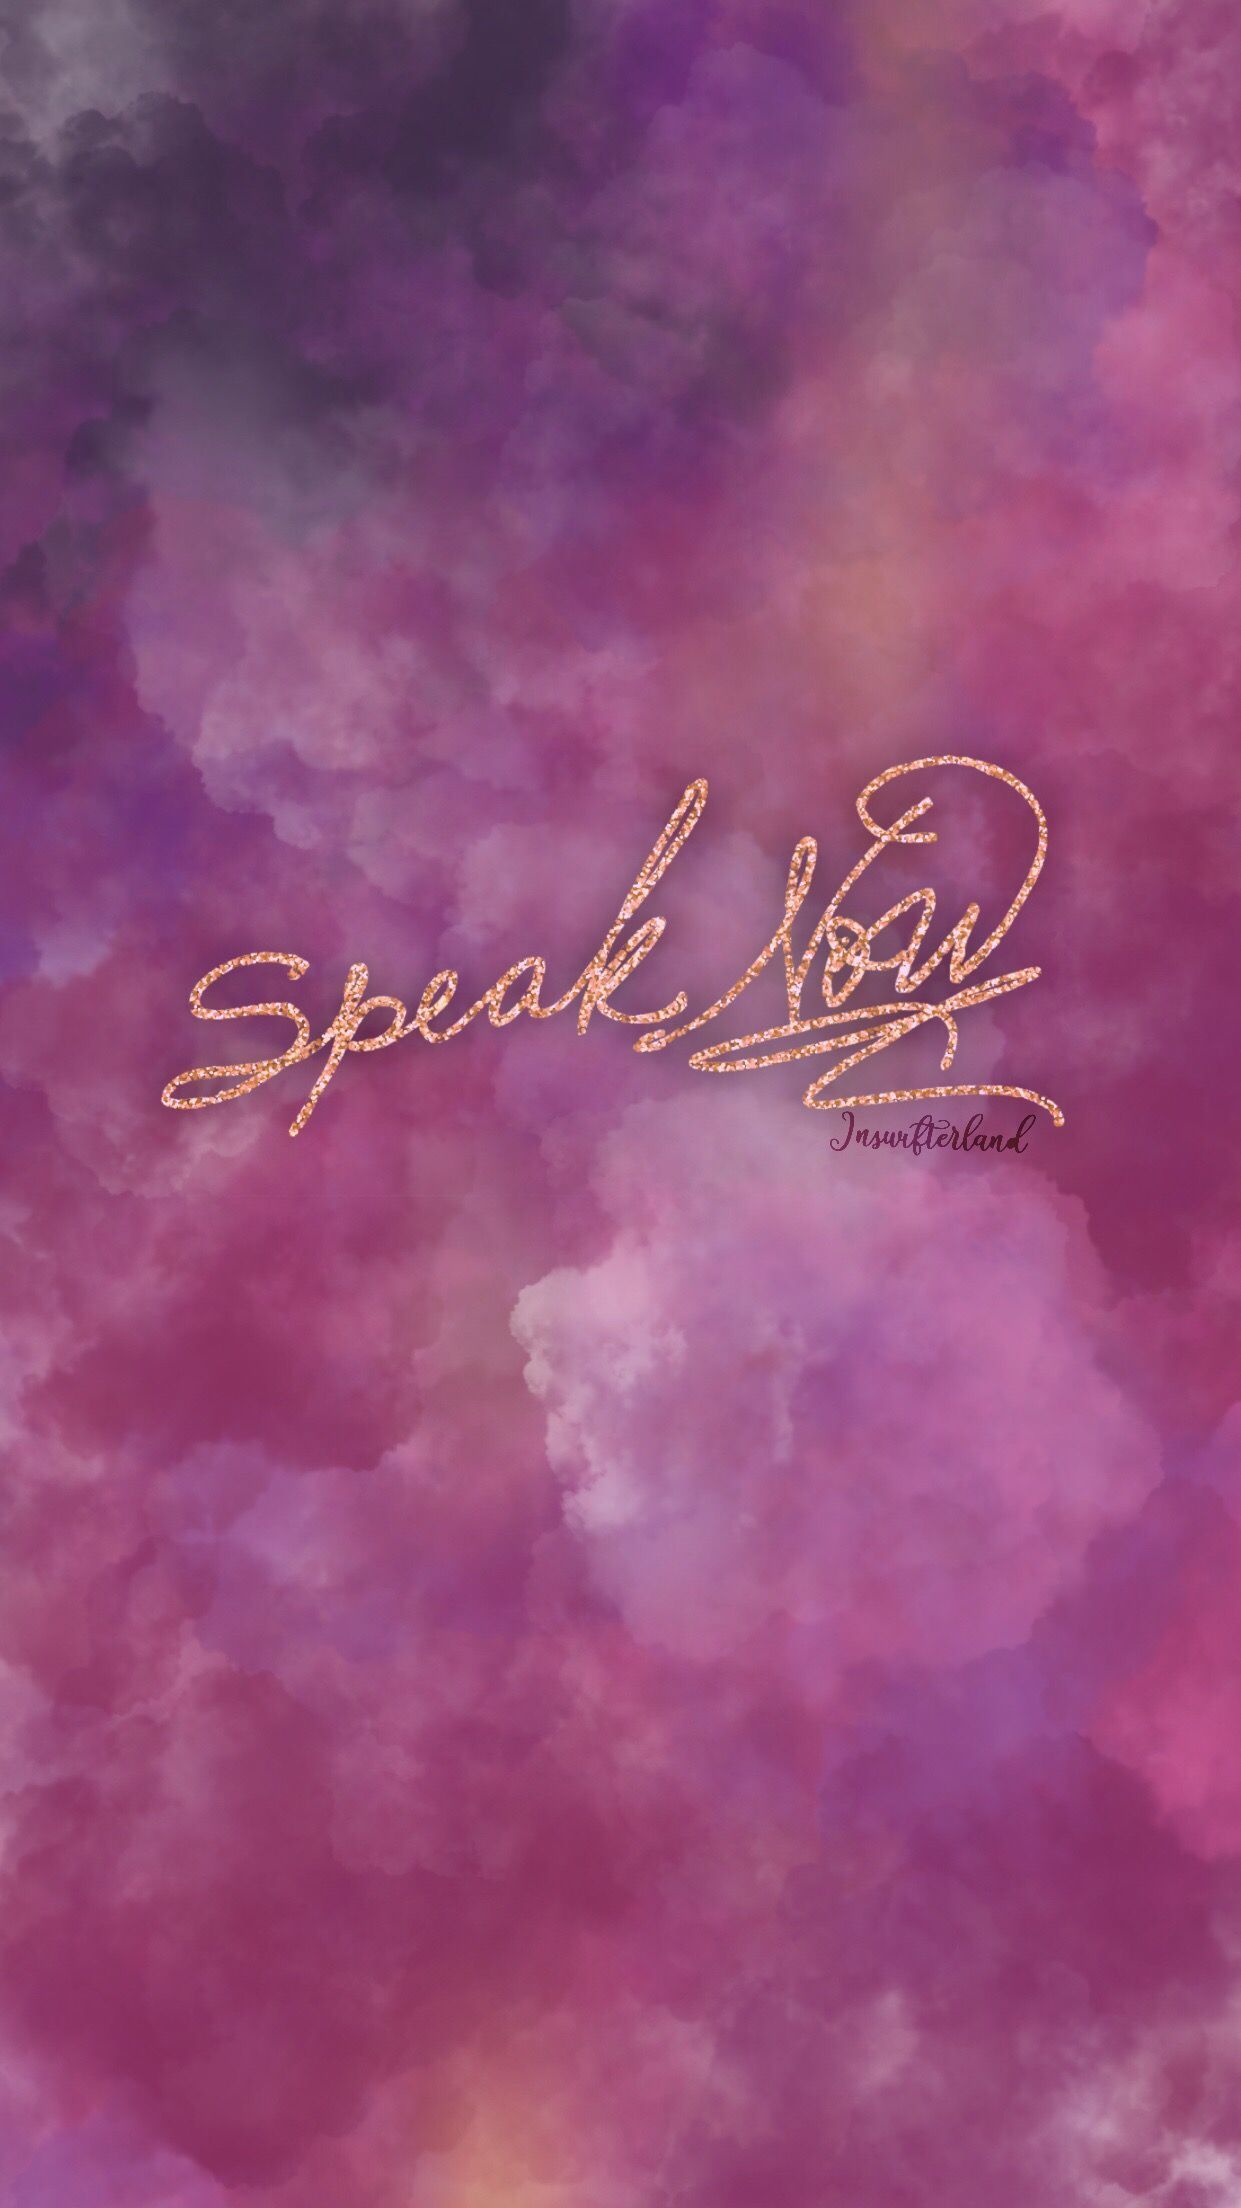 Taylor Swift Speak Now HD Android Wallpapers - Wallpaper Cave